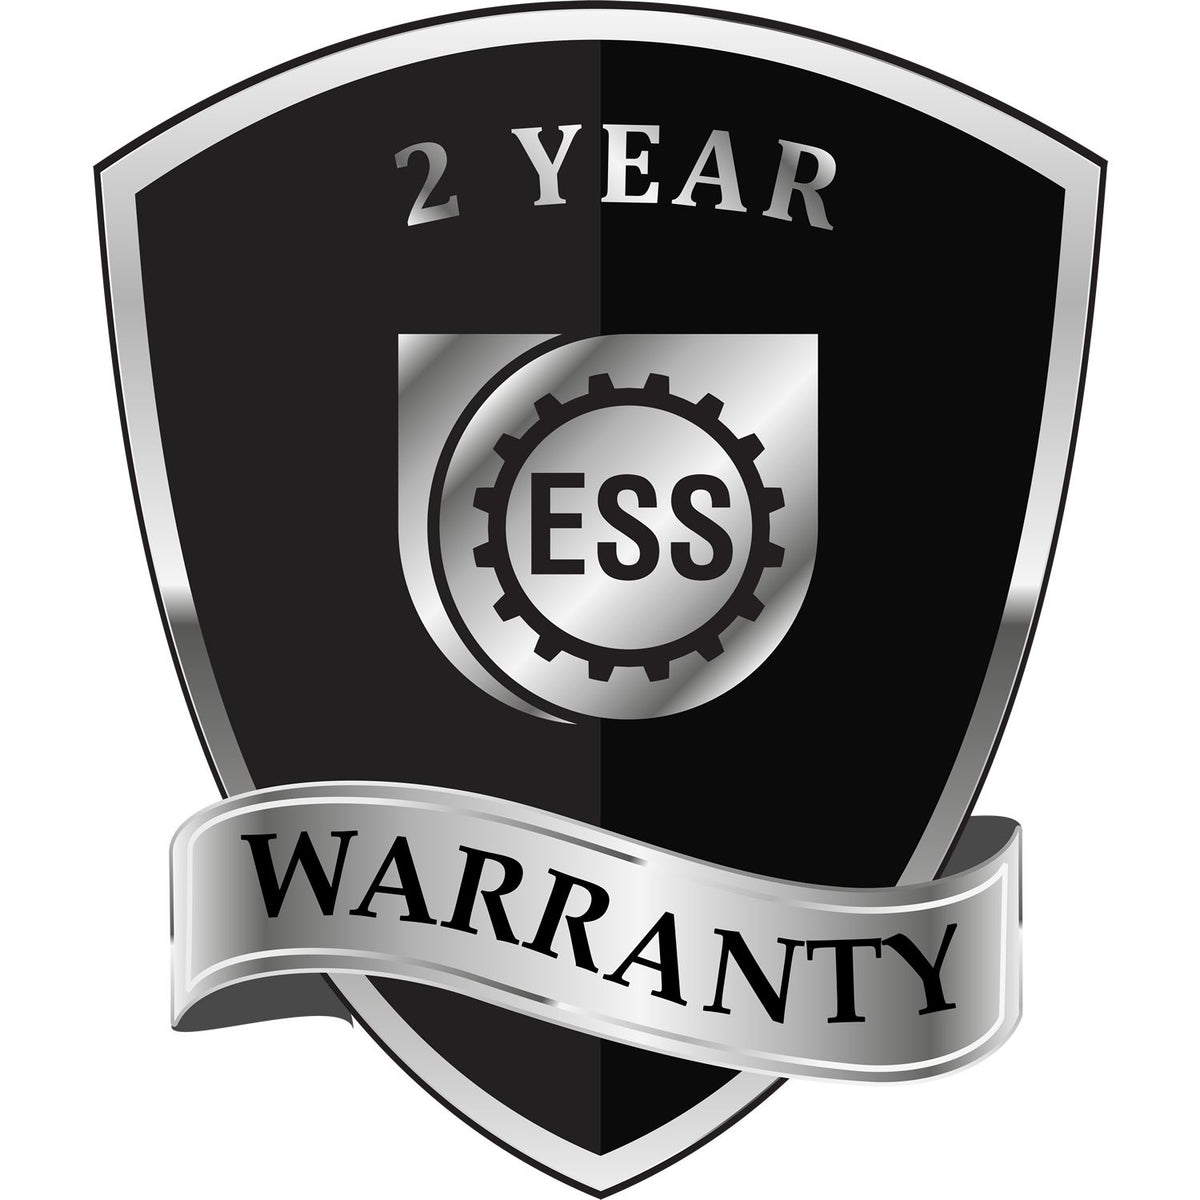 A black and silver badge or emblem showing warranty information for the Heavy Duty Cast Iron Virginia Geologist Seal Embosser